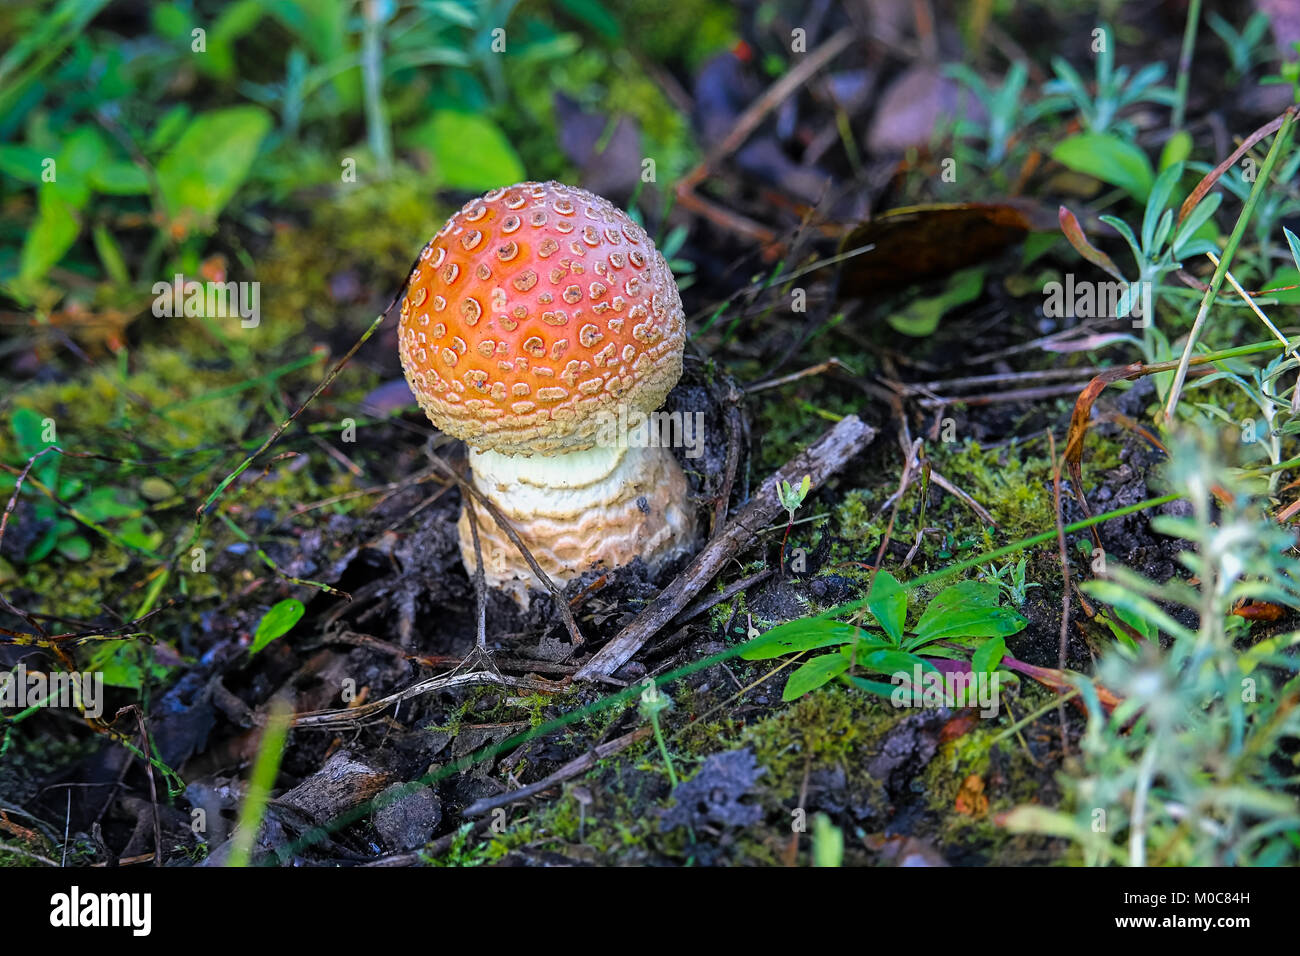 A red Amanita mushroom growing on the forest floor Stock Photo